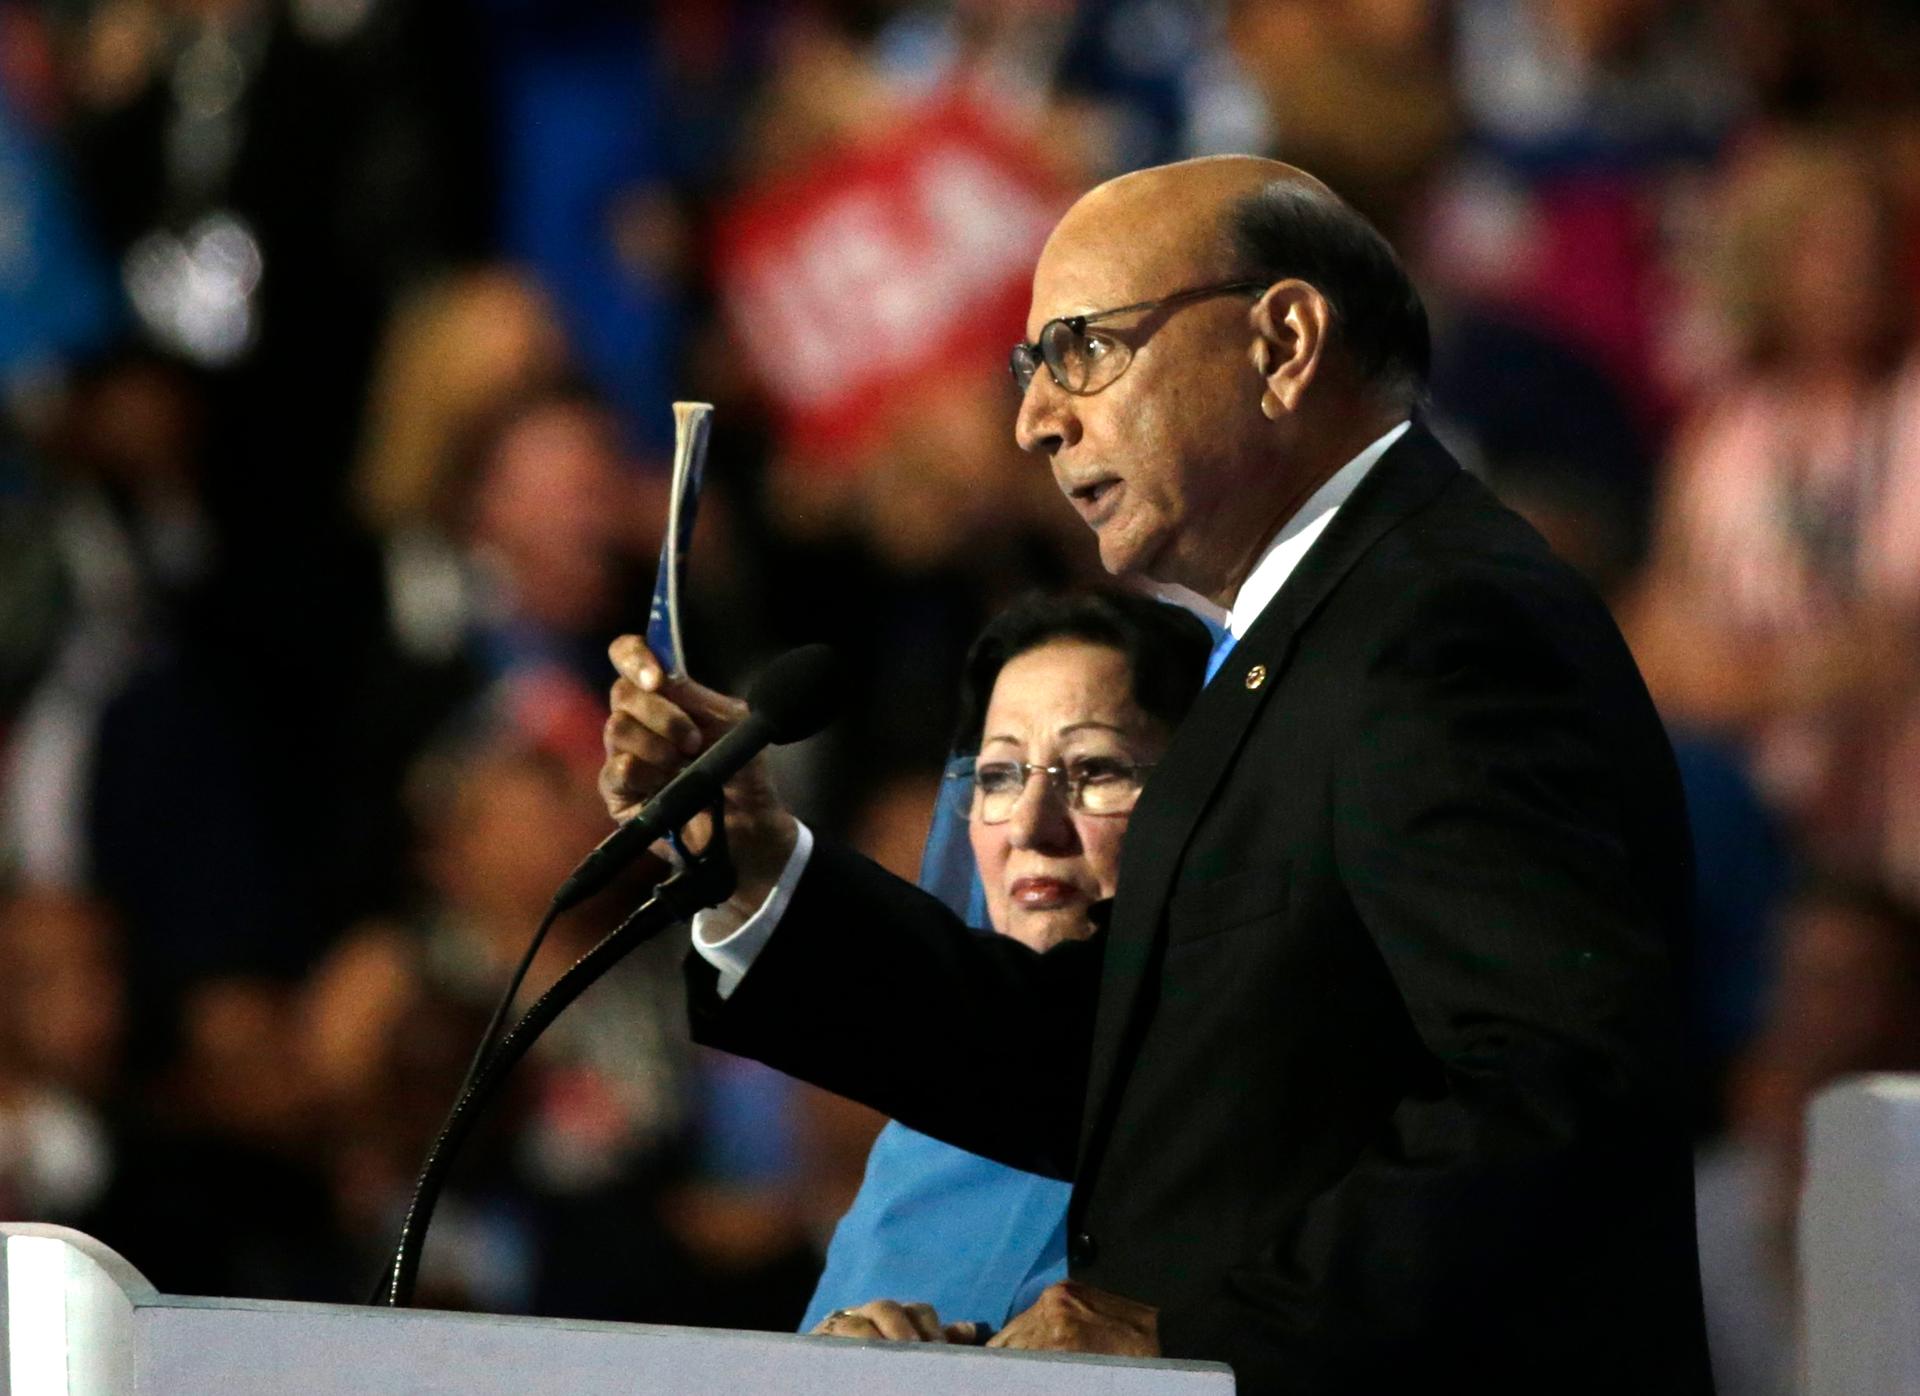 Khizr Khan, who's son Humayun was killed serving in the US Army ten years after September 11, 2001, challenges Republican presidential nominee Donald Trump to read his copy of the U.S. Constitution at the DNC, July 28, 2016.